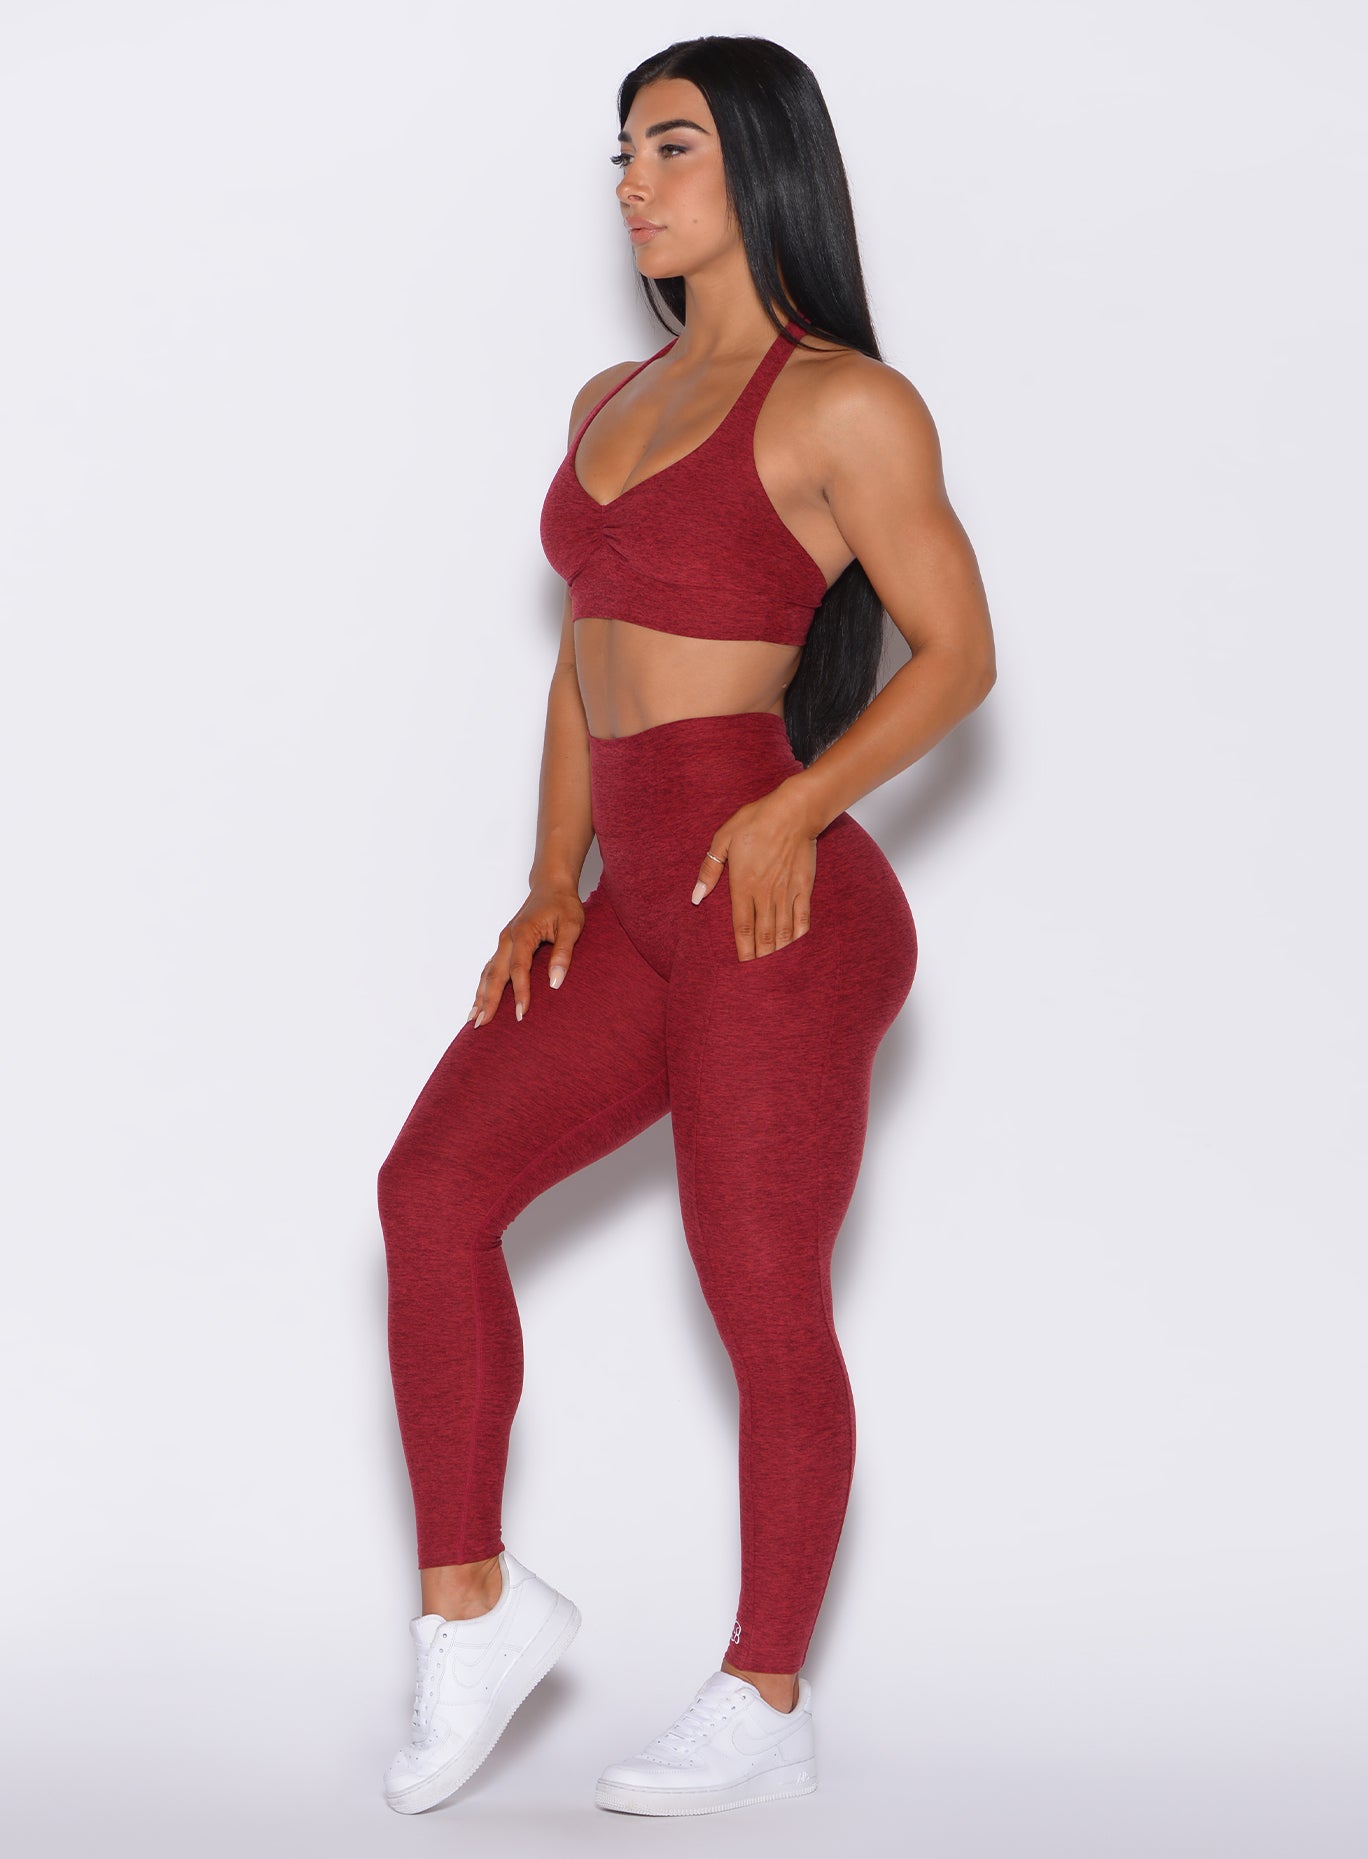 Left side profile view of a model angled left wearing our V Back Leggings in garnet red along with the matching bra